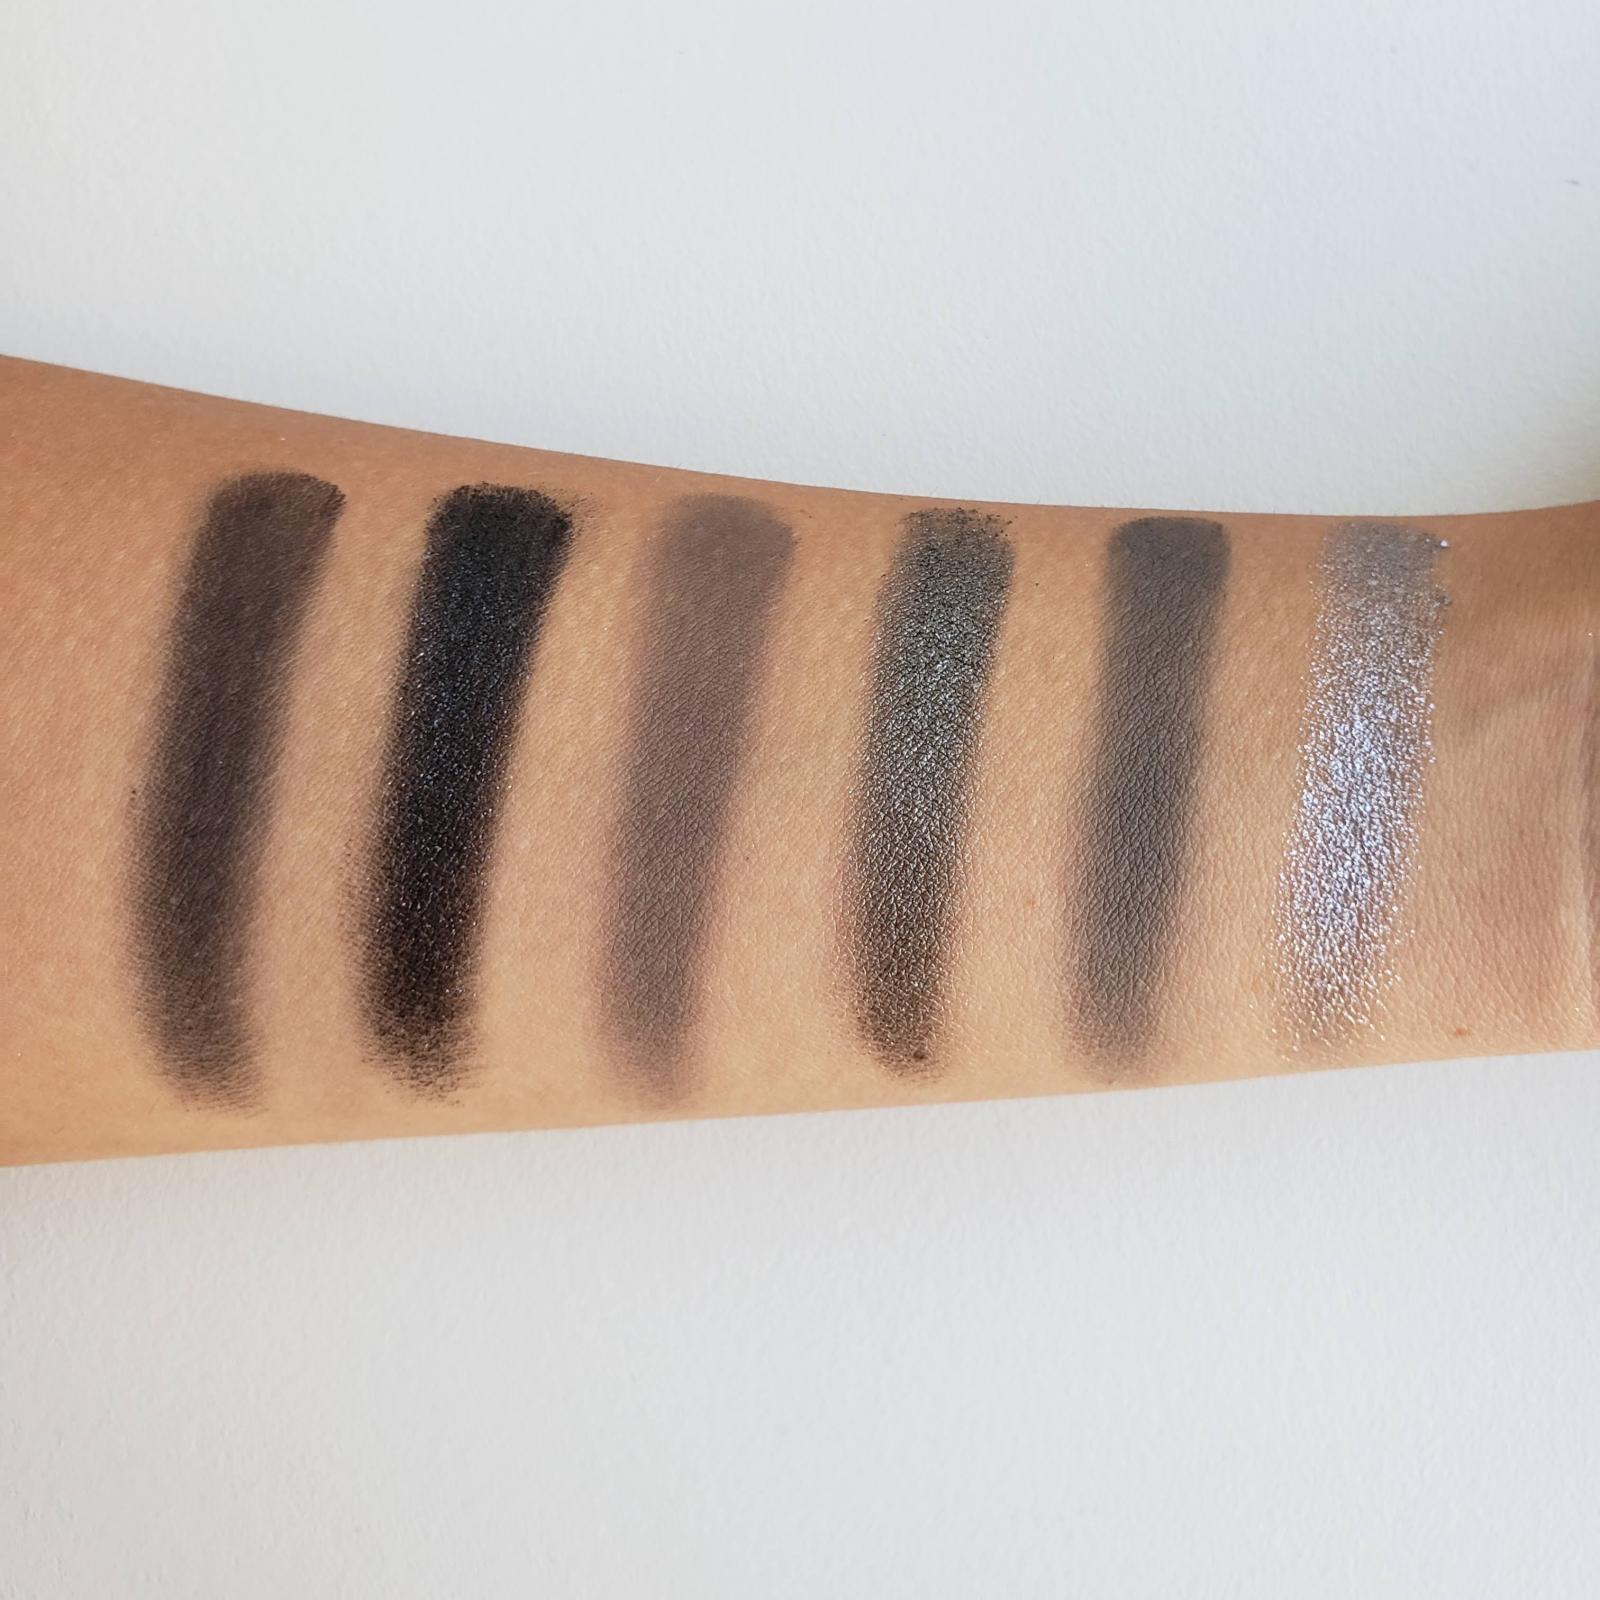 Jeffree Star Cosmetics Cremated Eyeshadow Palette Review Swatches 1